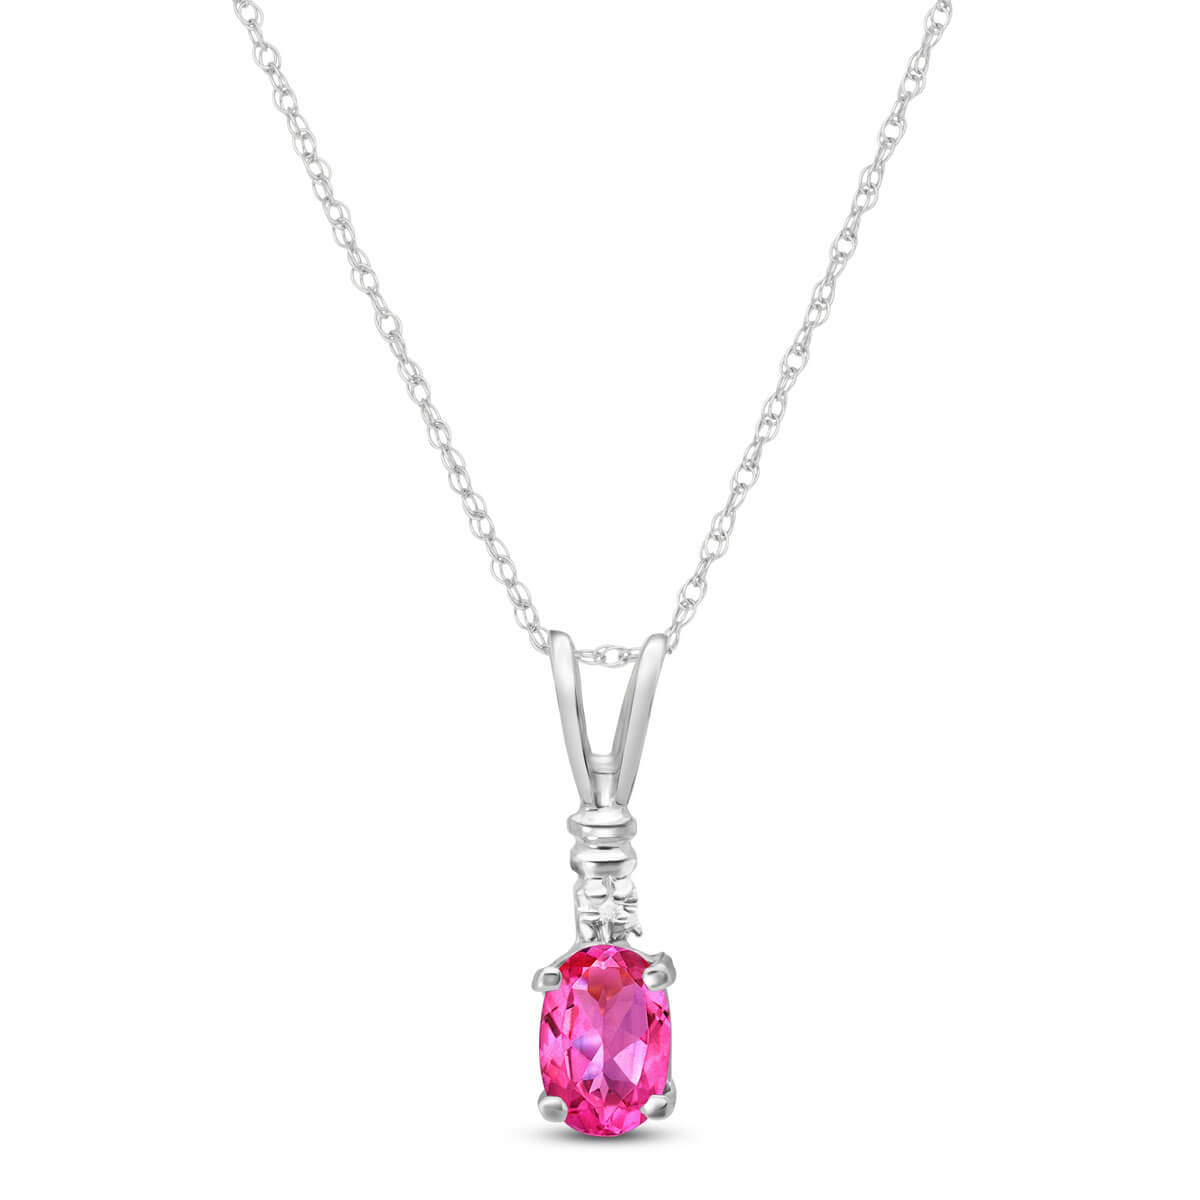 Pink Topaz & Diamond Cap Oval Pendant Necklace in 9ct White Gold